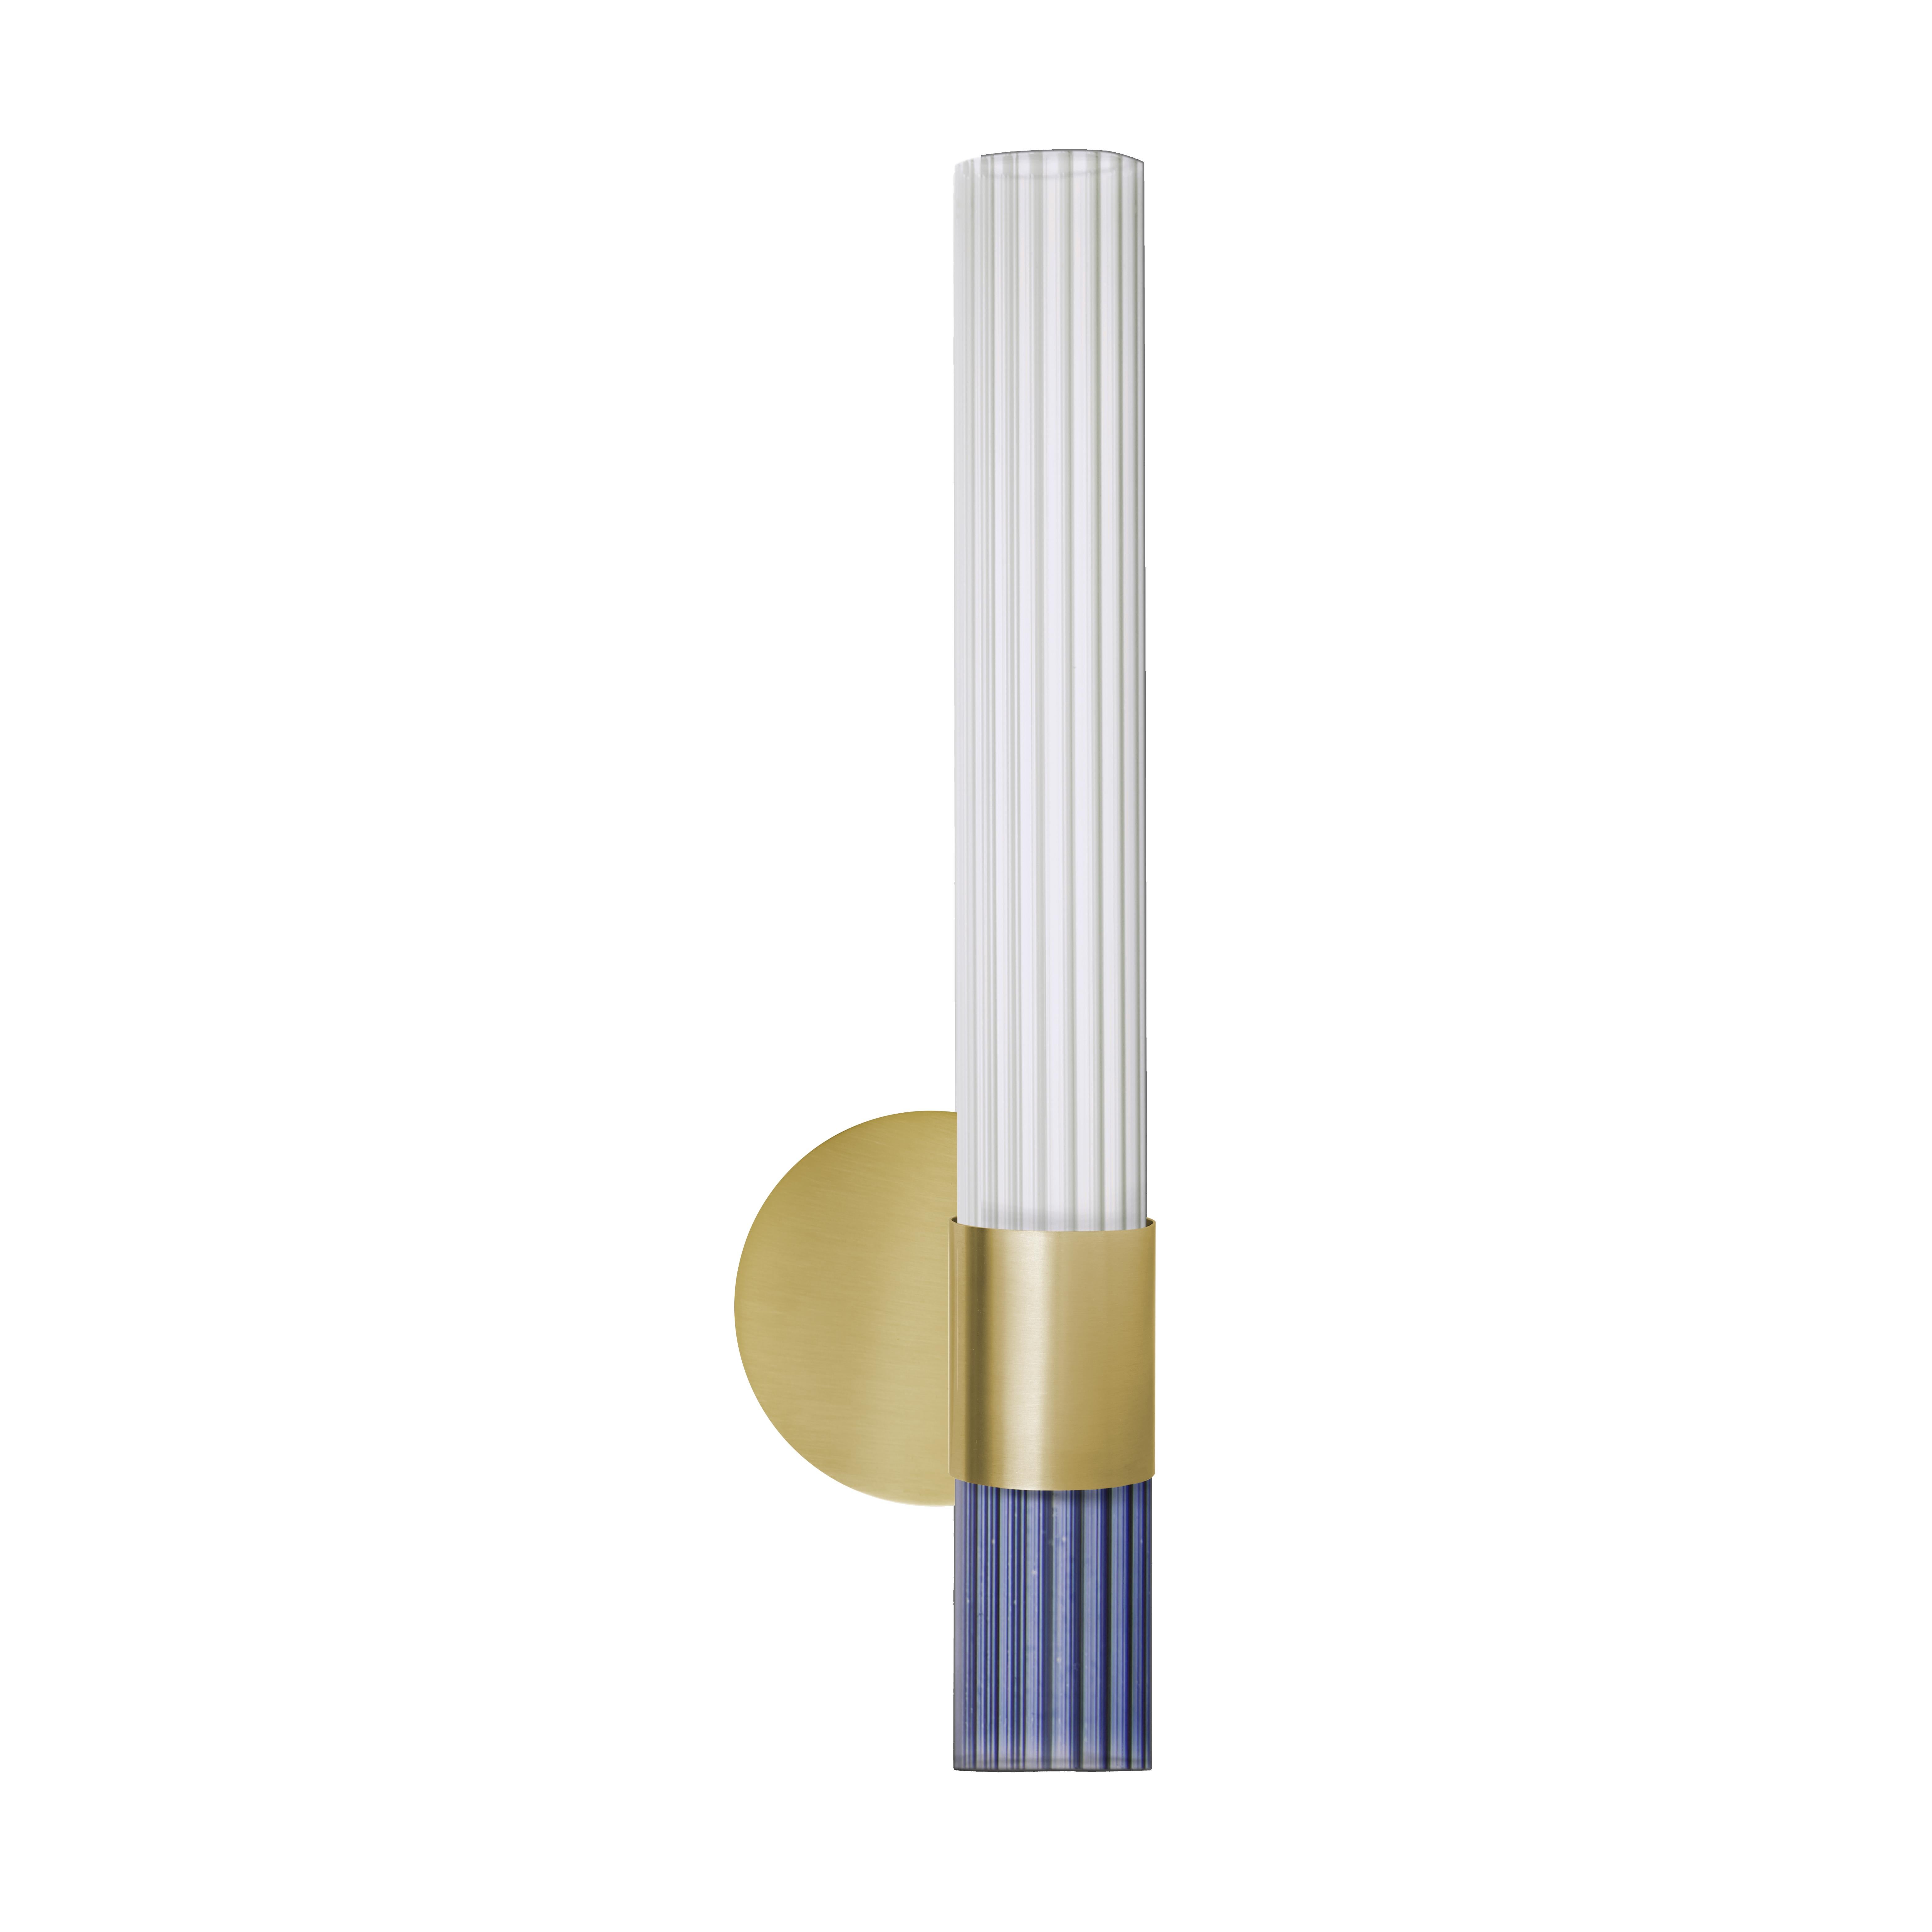 Sbarlusc wall lamp by Luce Tu
Dimensions: 49 x 13 cm
Materials: brass and glass

State-of-the-art technology and craftsmanship come together in this wall lamp with an almost timeless charm. Like a precious jewel, the SW01 wall lamp is perfect